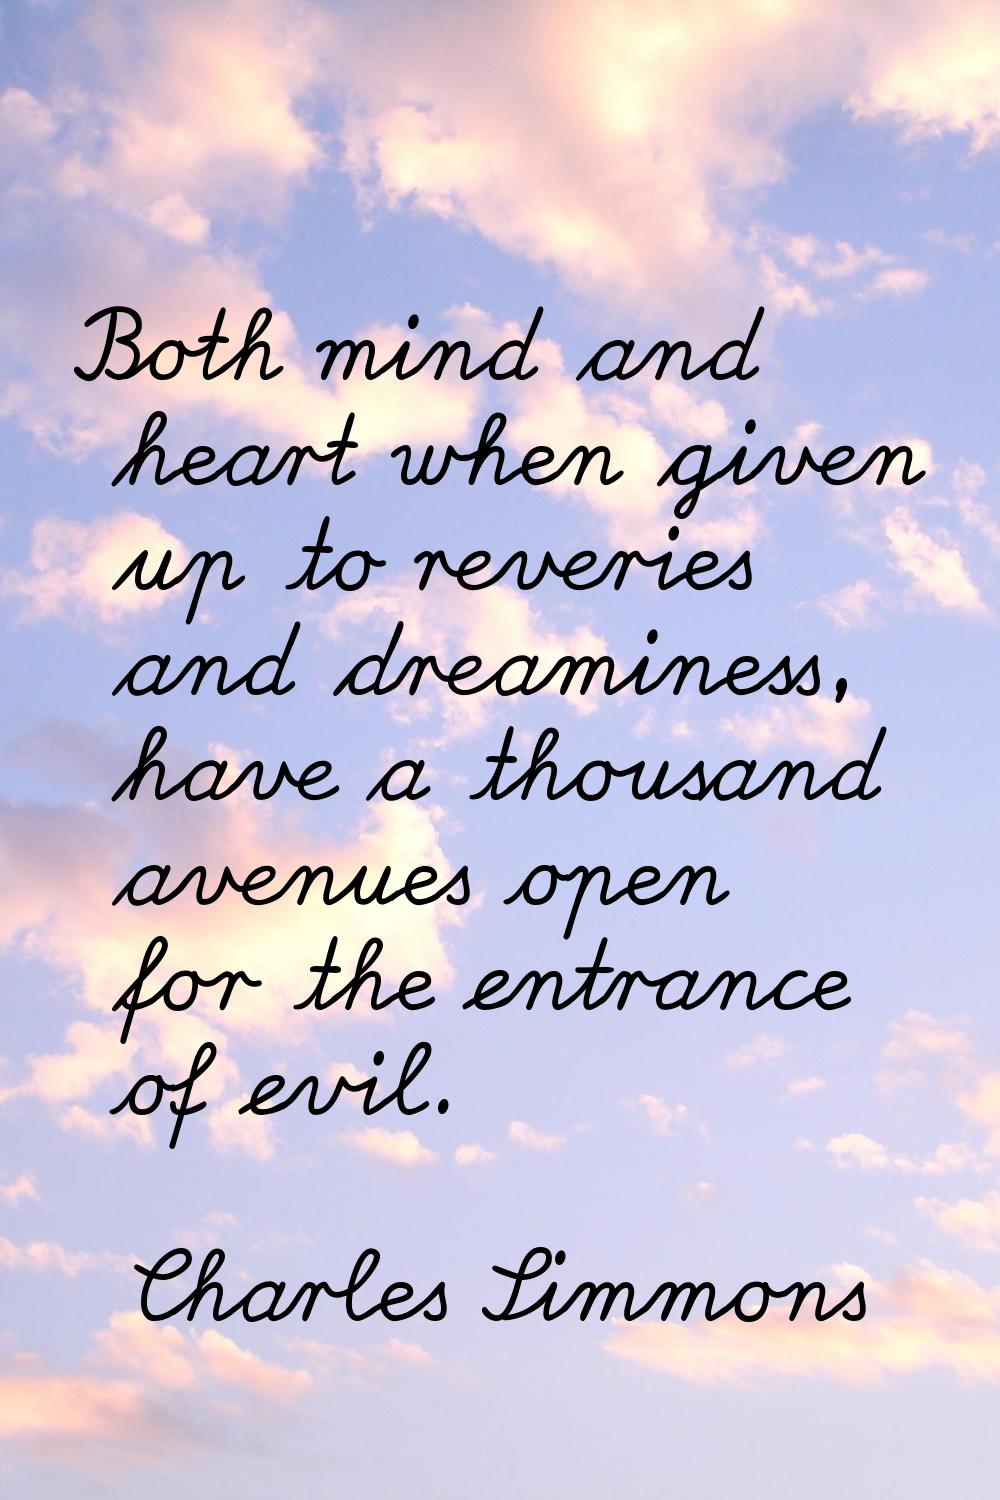 Both mind and heart when given up to reveries and dreaminess, have a thousand avenues open for the 